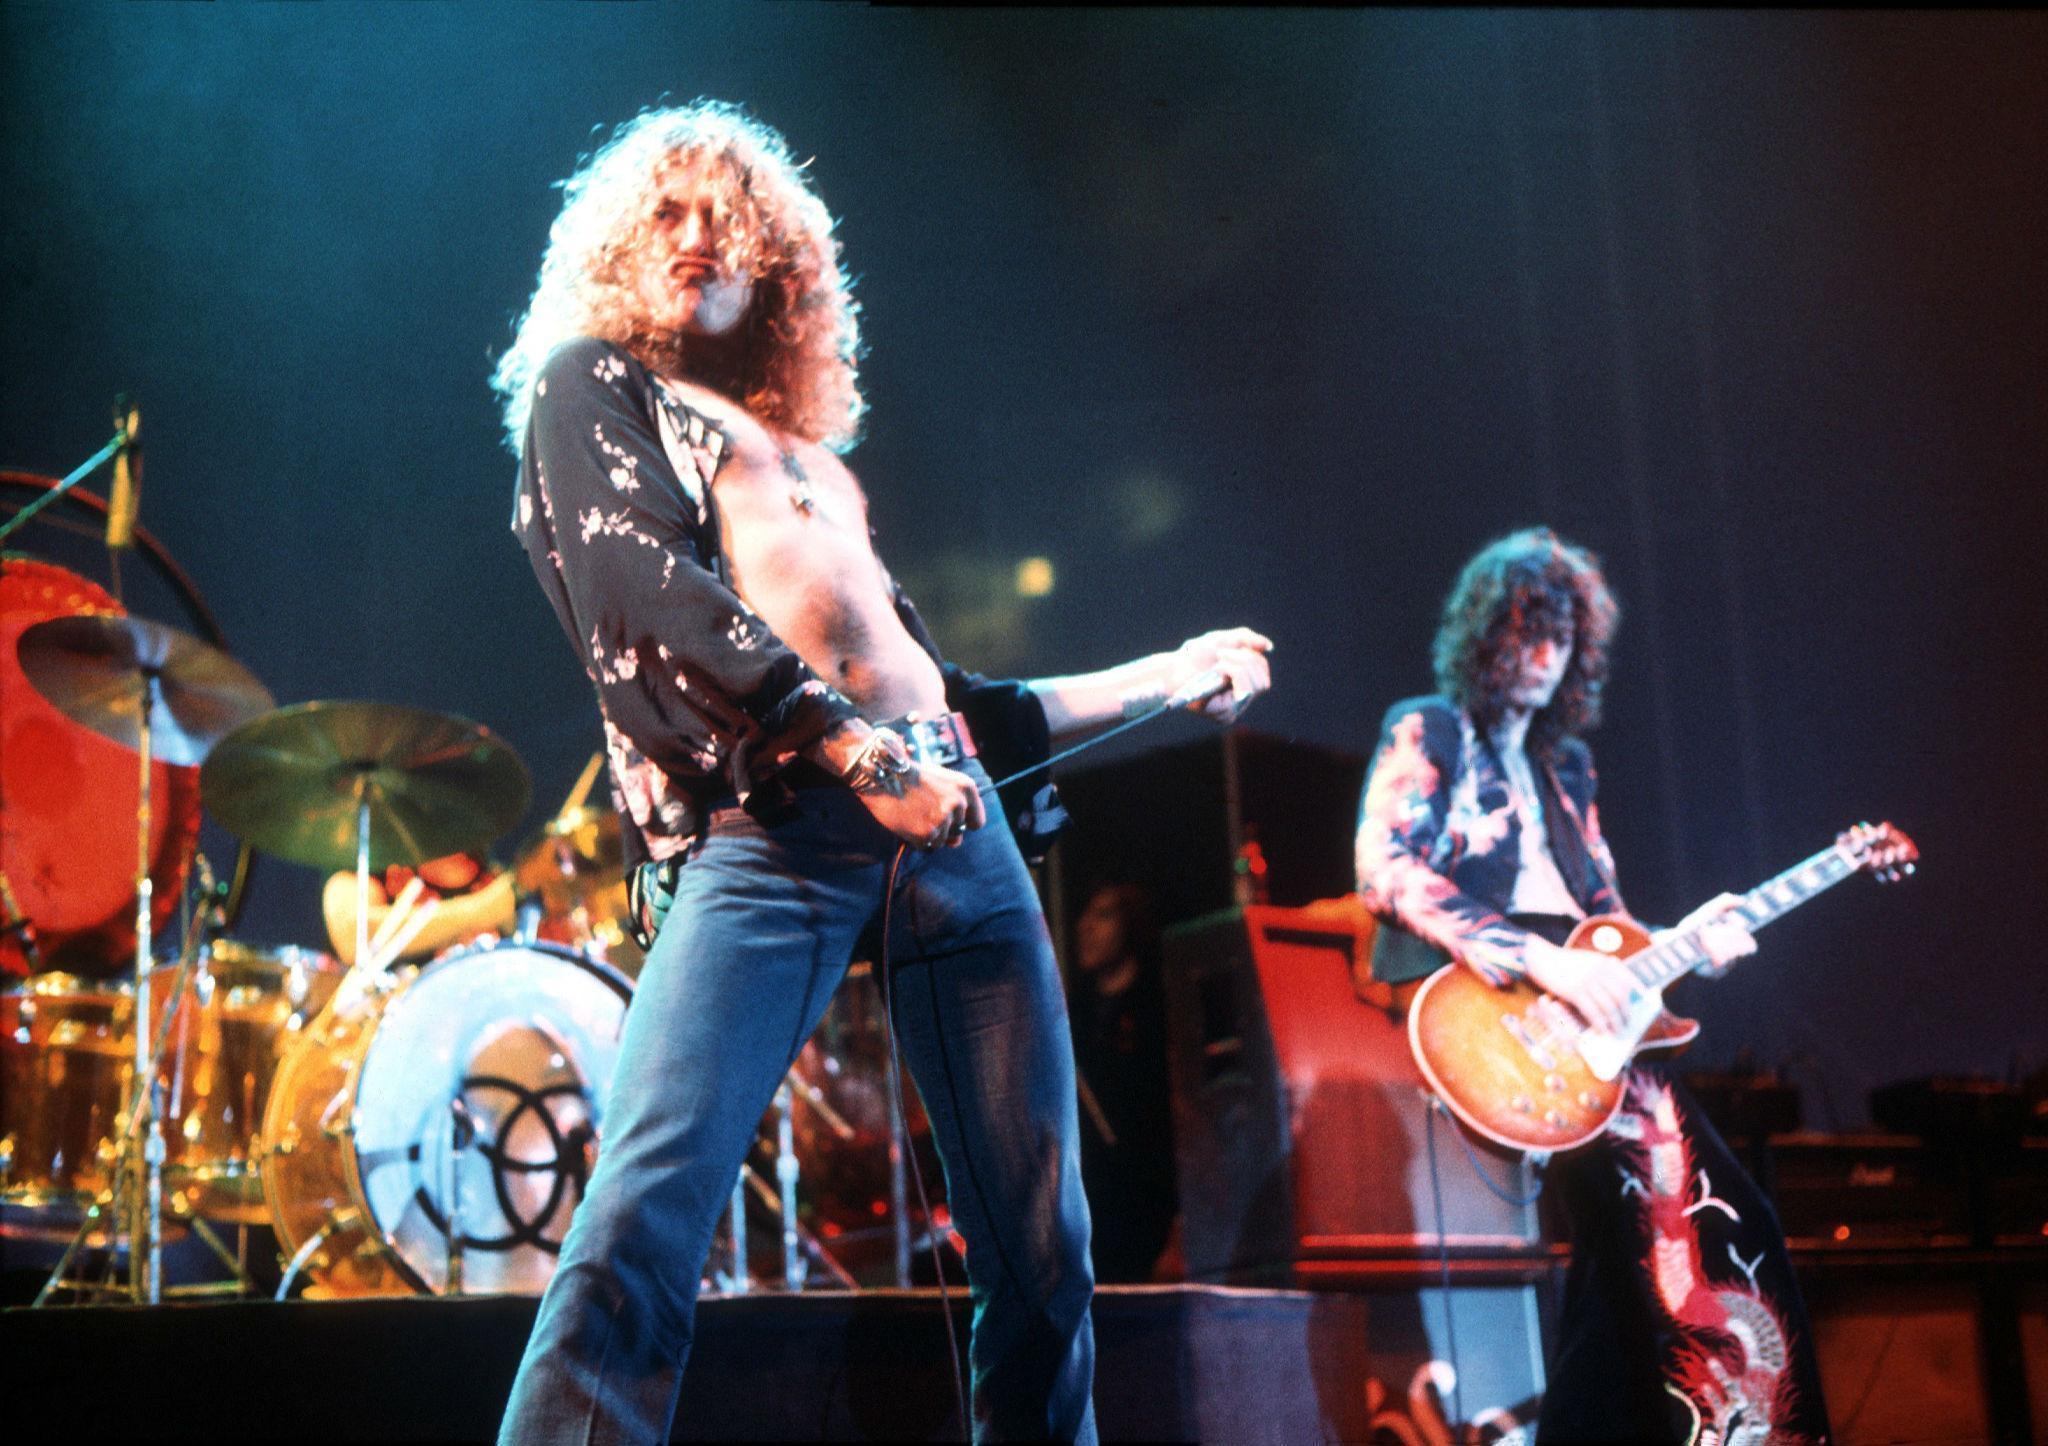 Singer Robert Plant and guitarist Jimmy Page in 1975, at the peak of the band’s pomp